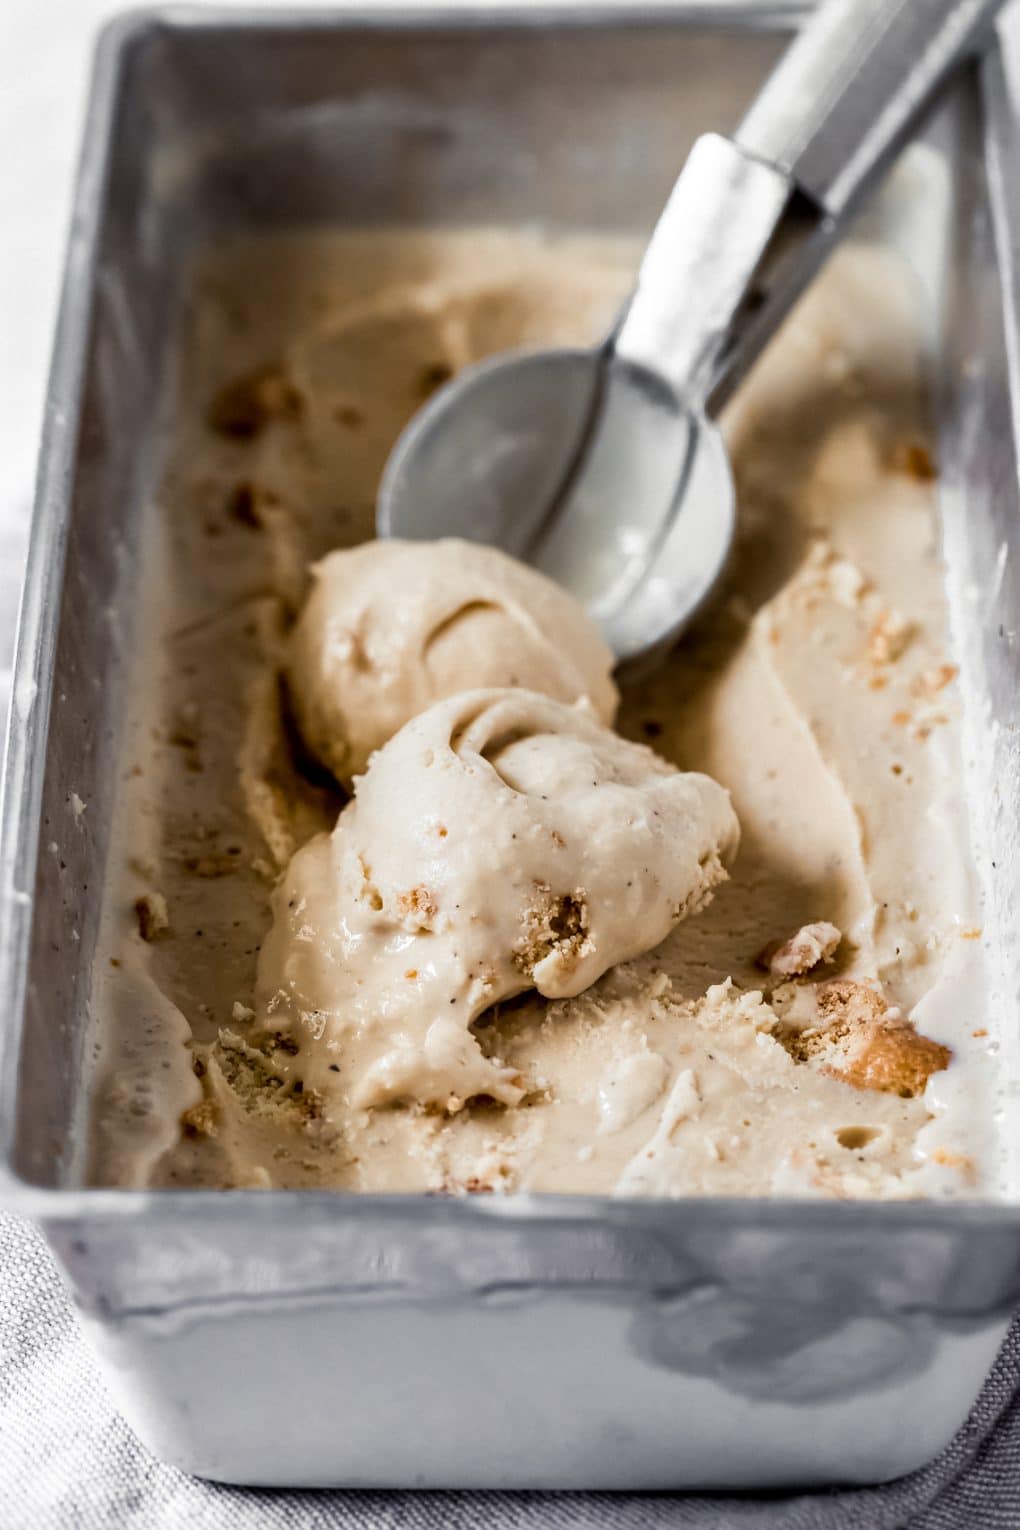 London fog ice cream in a metal container with an ice cream scoop